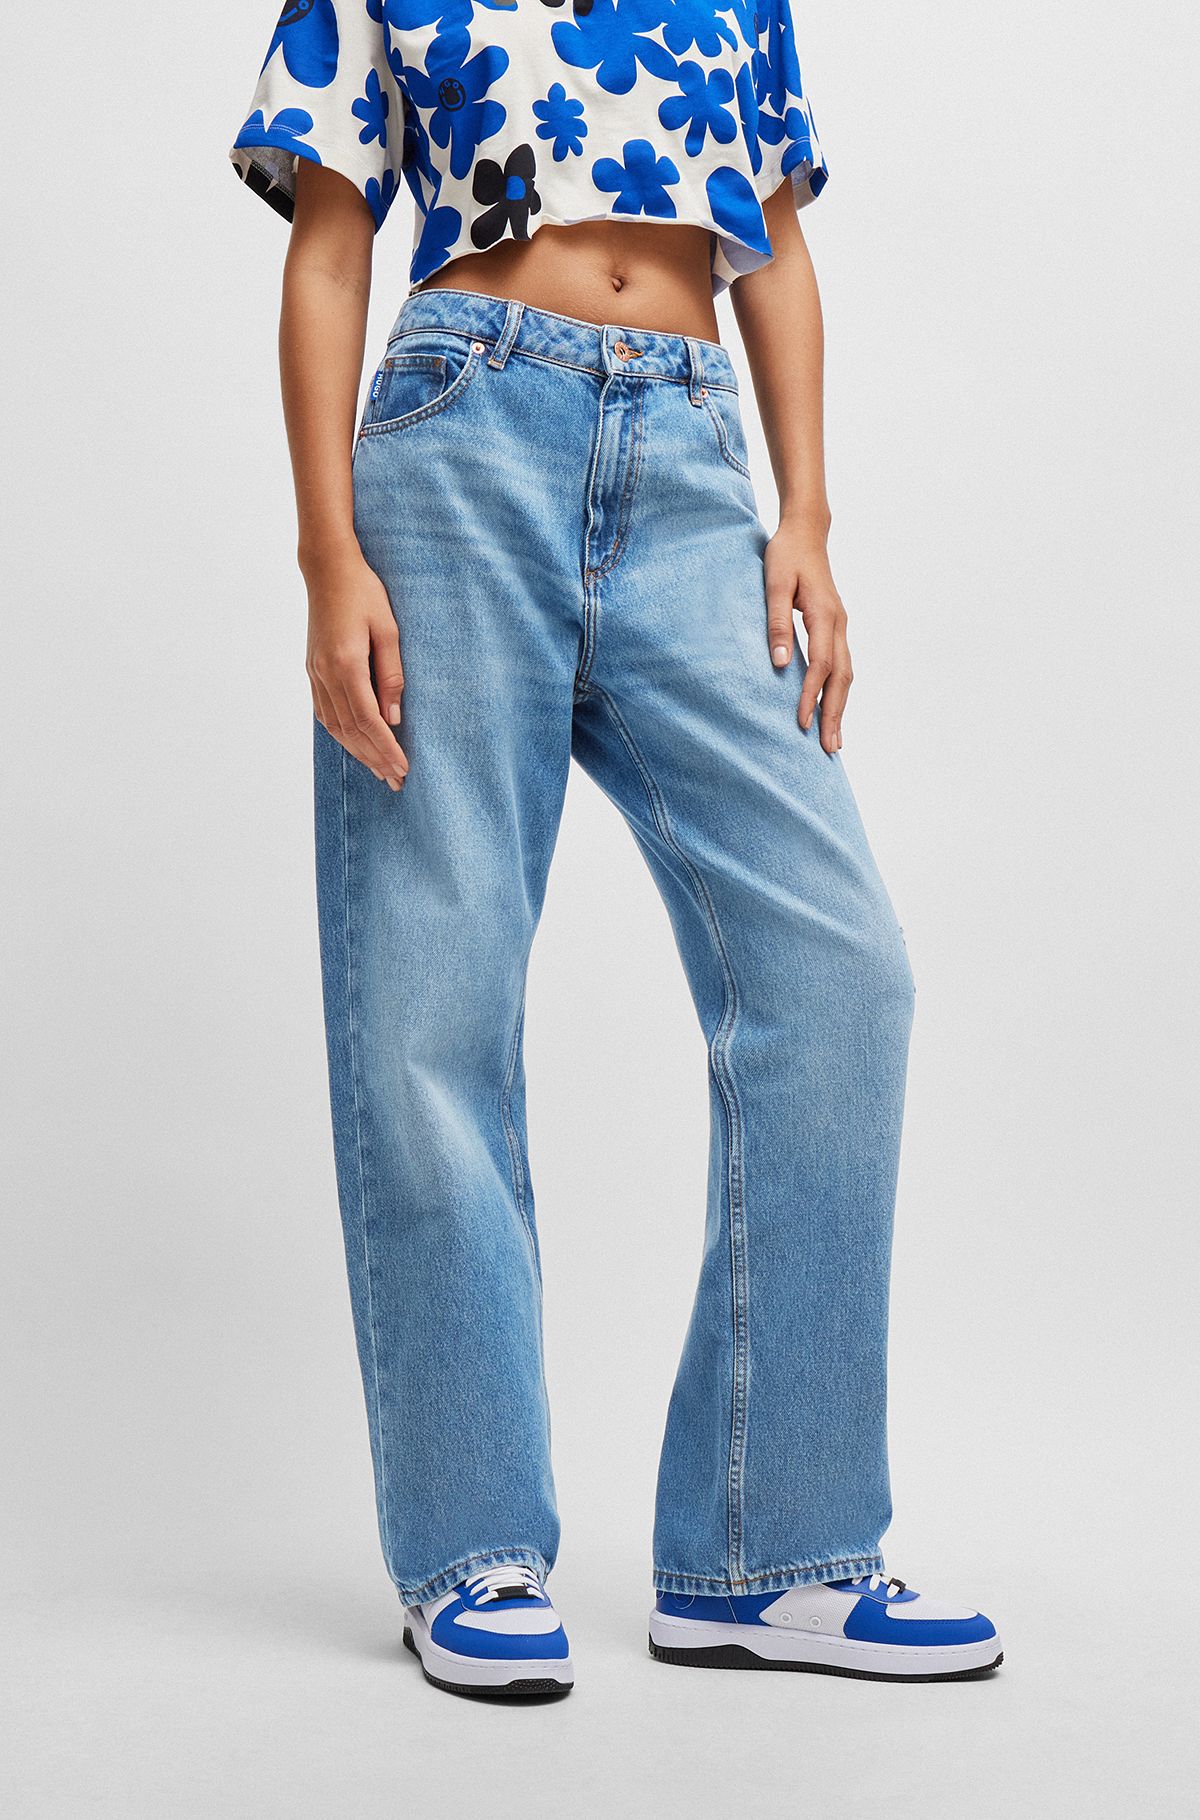 HUGO - Relaxed-fit jeans with criss-cross waistband